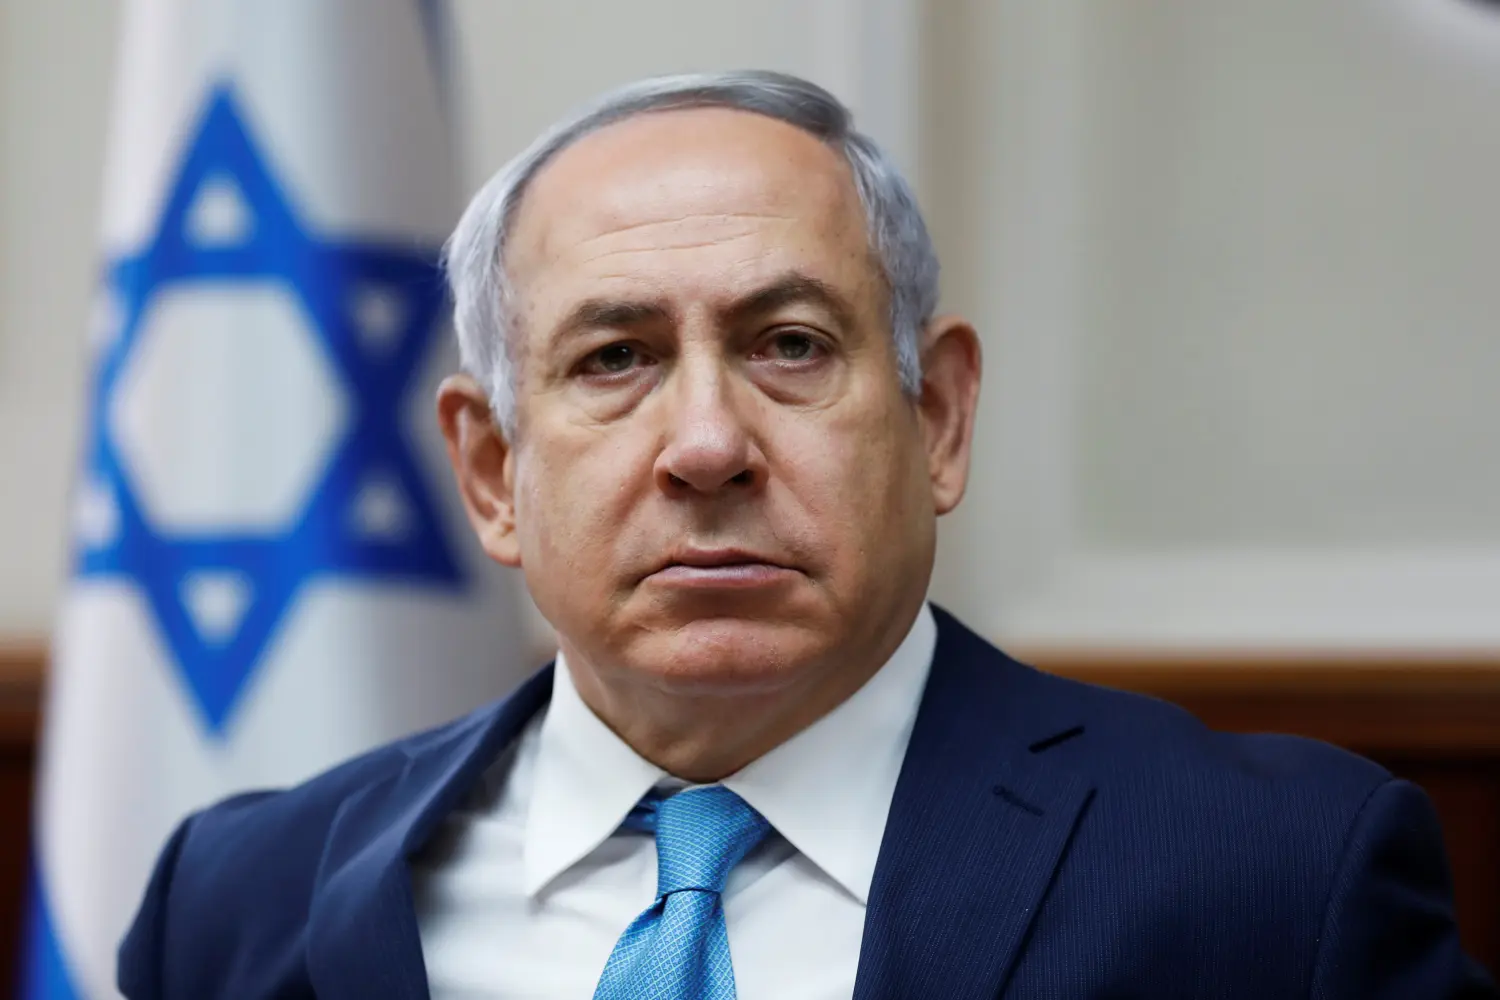 Netanyahu’s Main Political Rival Calls For Early Elections in Israel